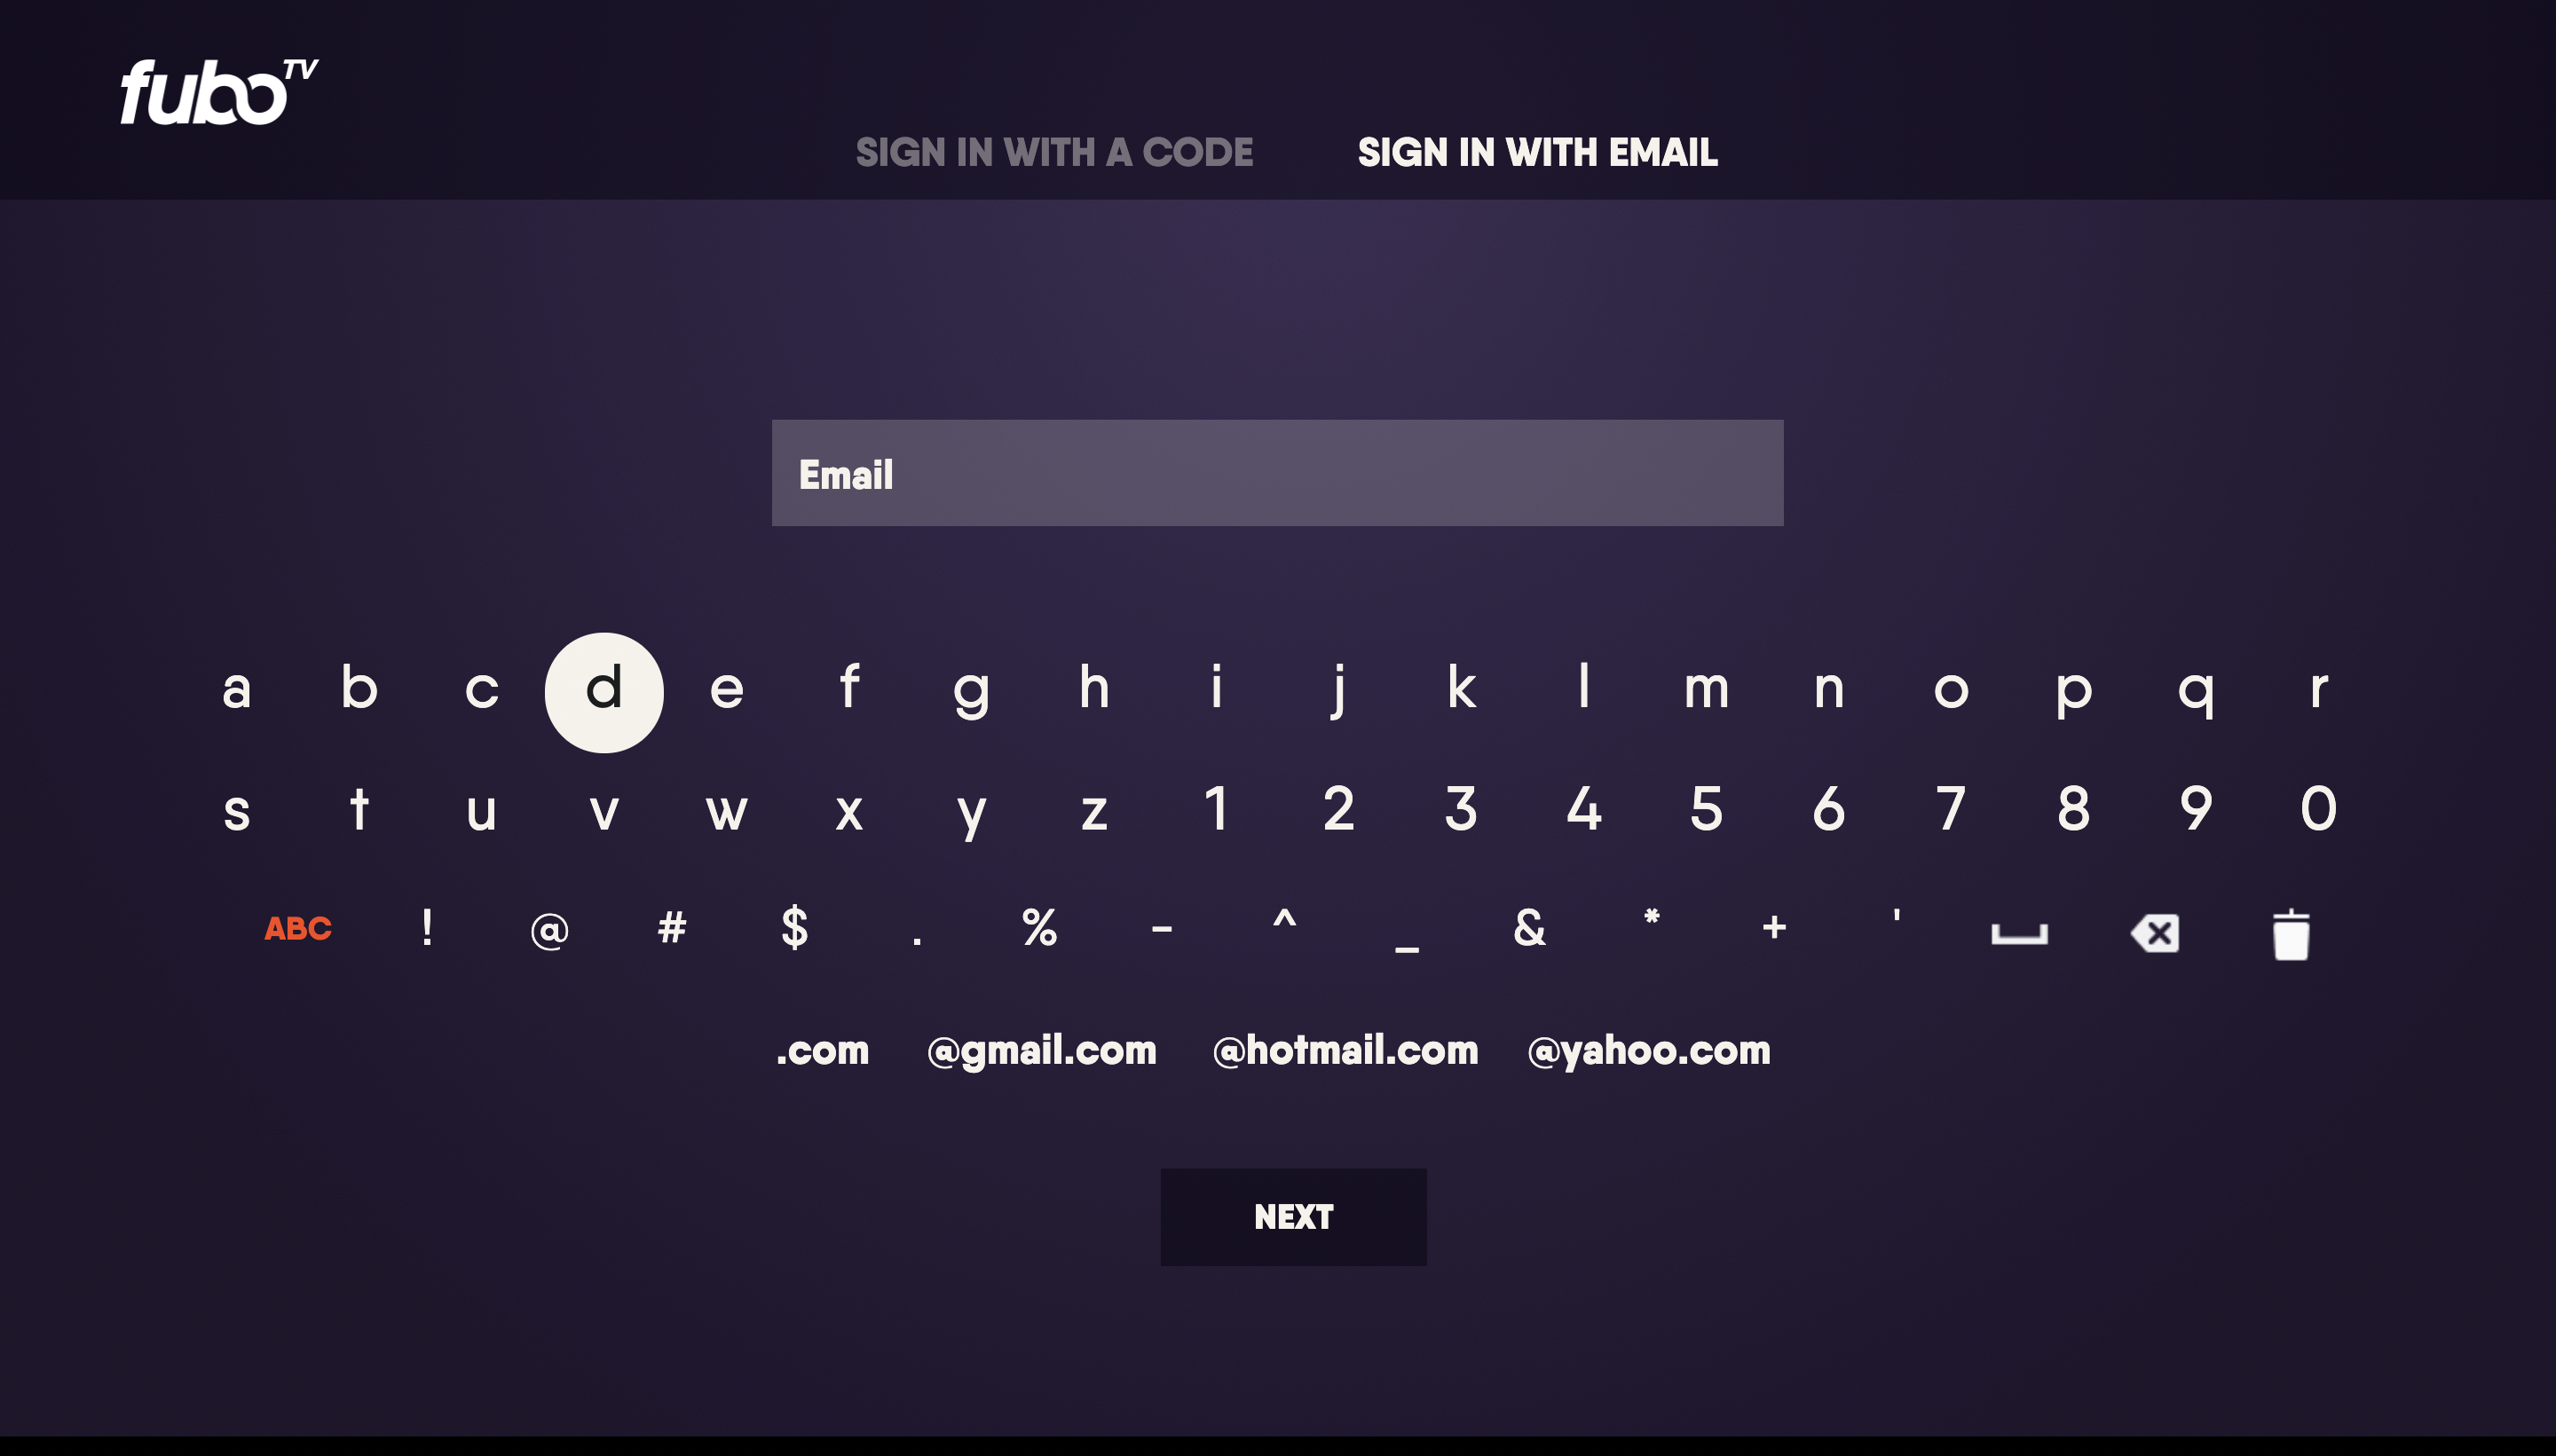 On-screen keyboard to sign in to the Fubo app on Samsung TV using the remote